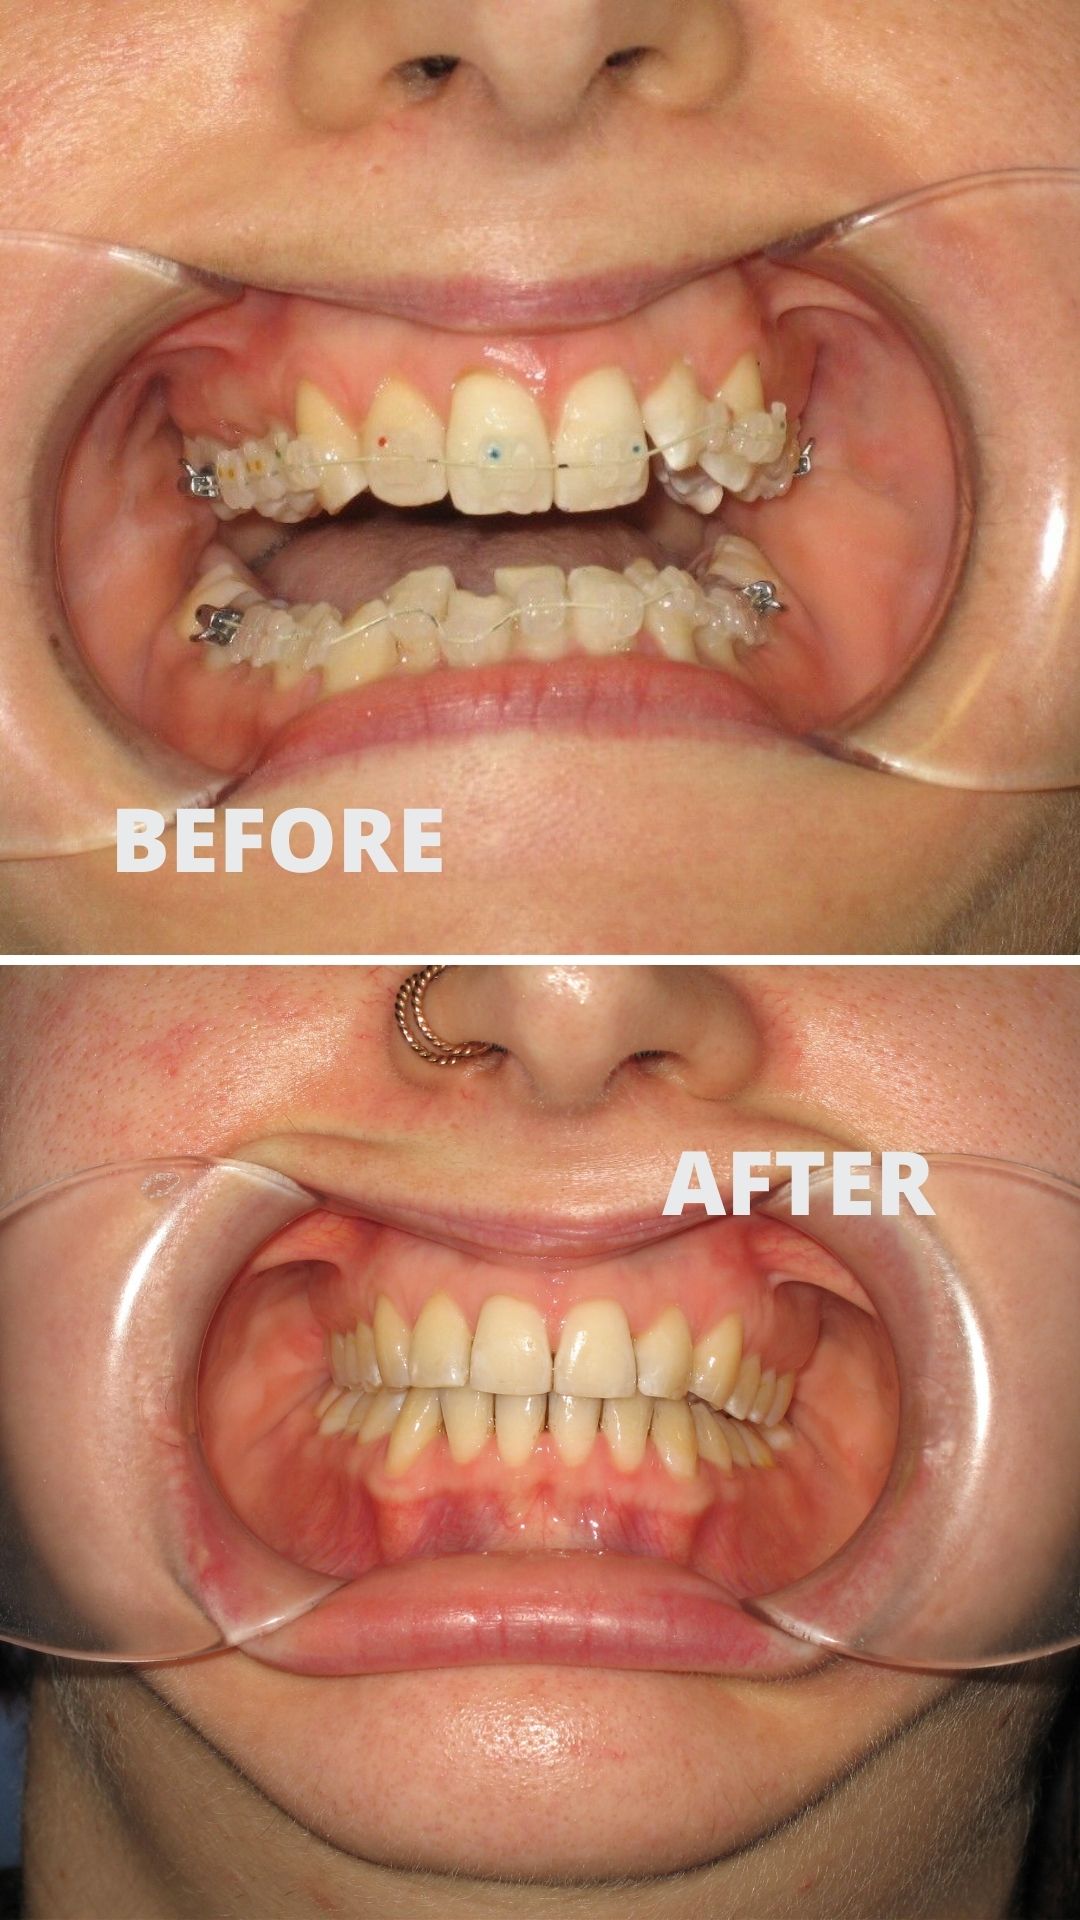 Before and after orthodontic treatment